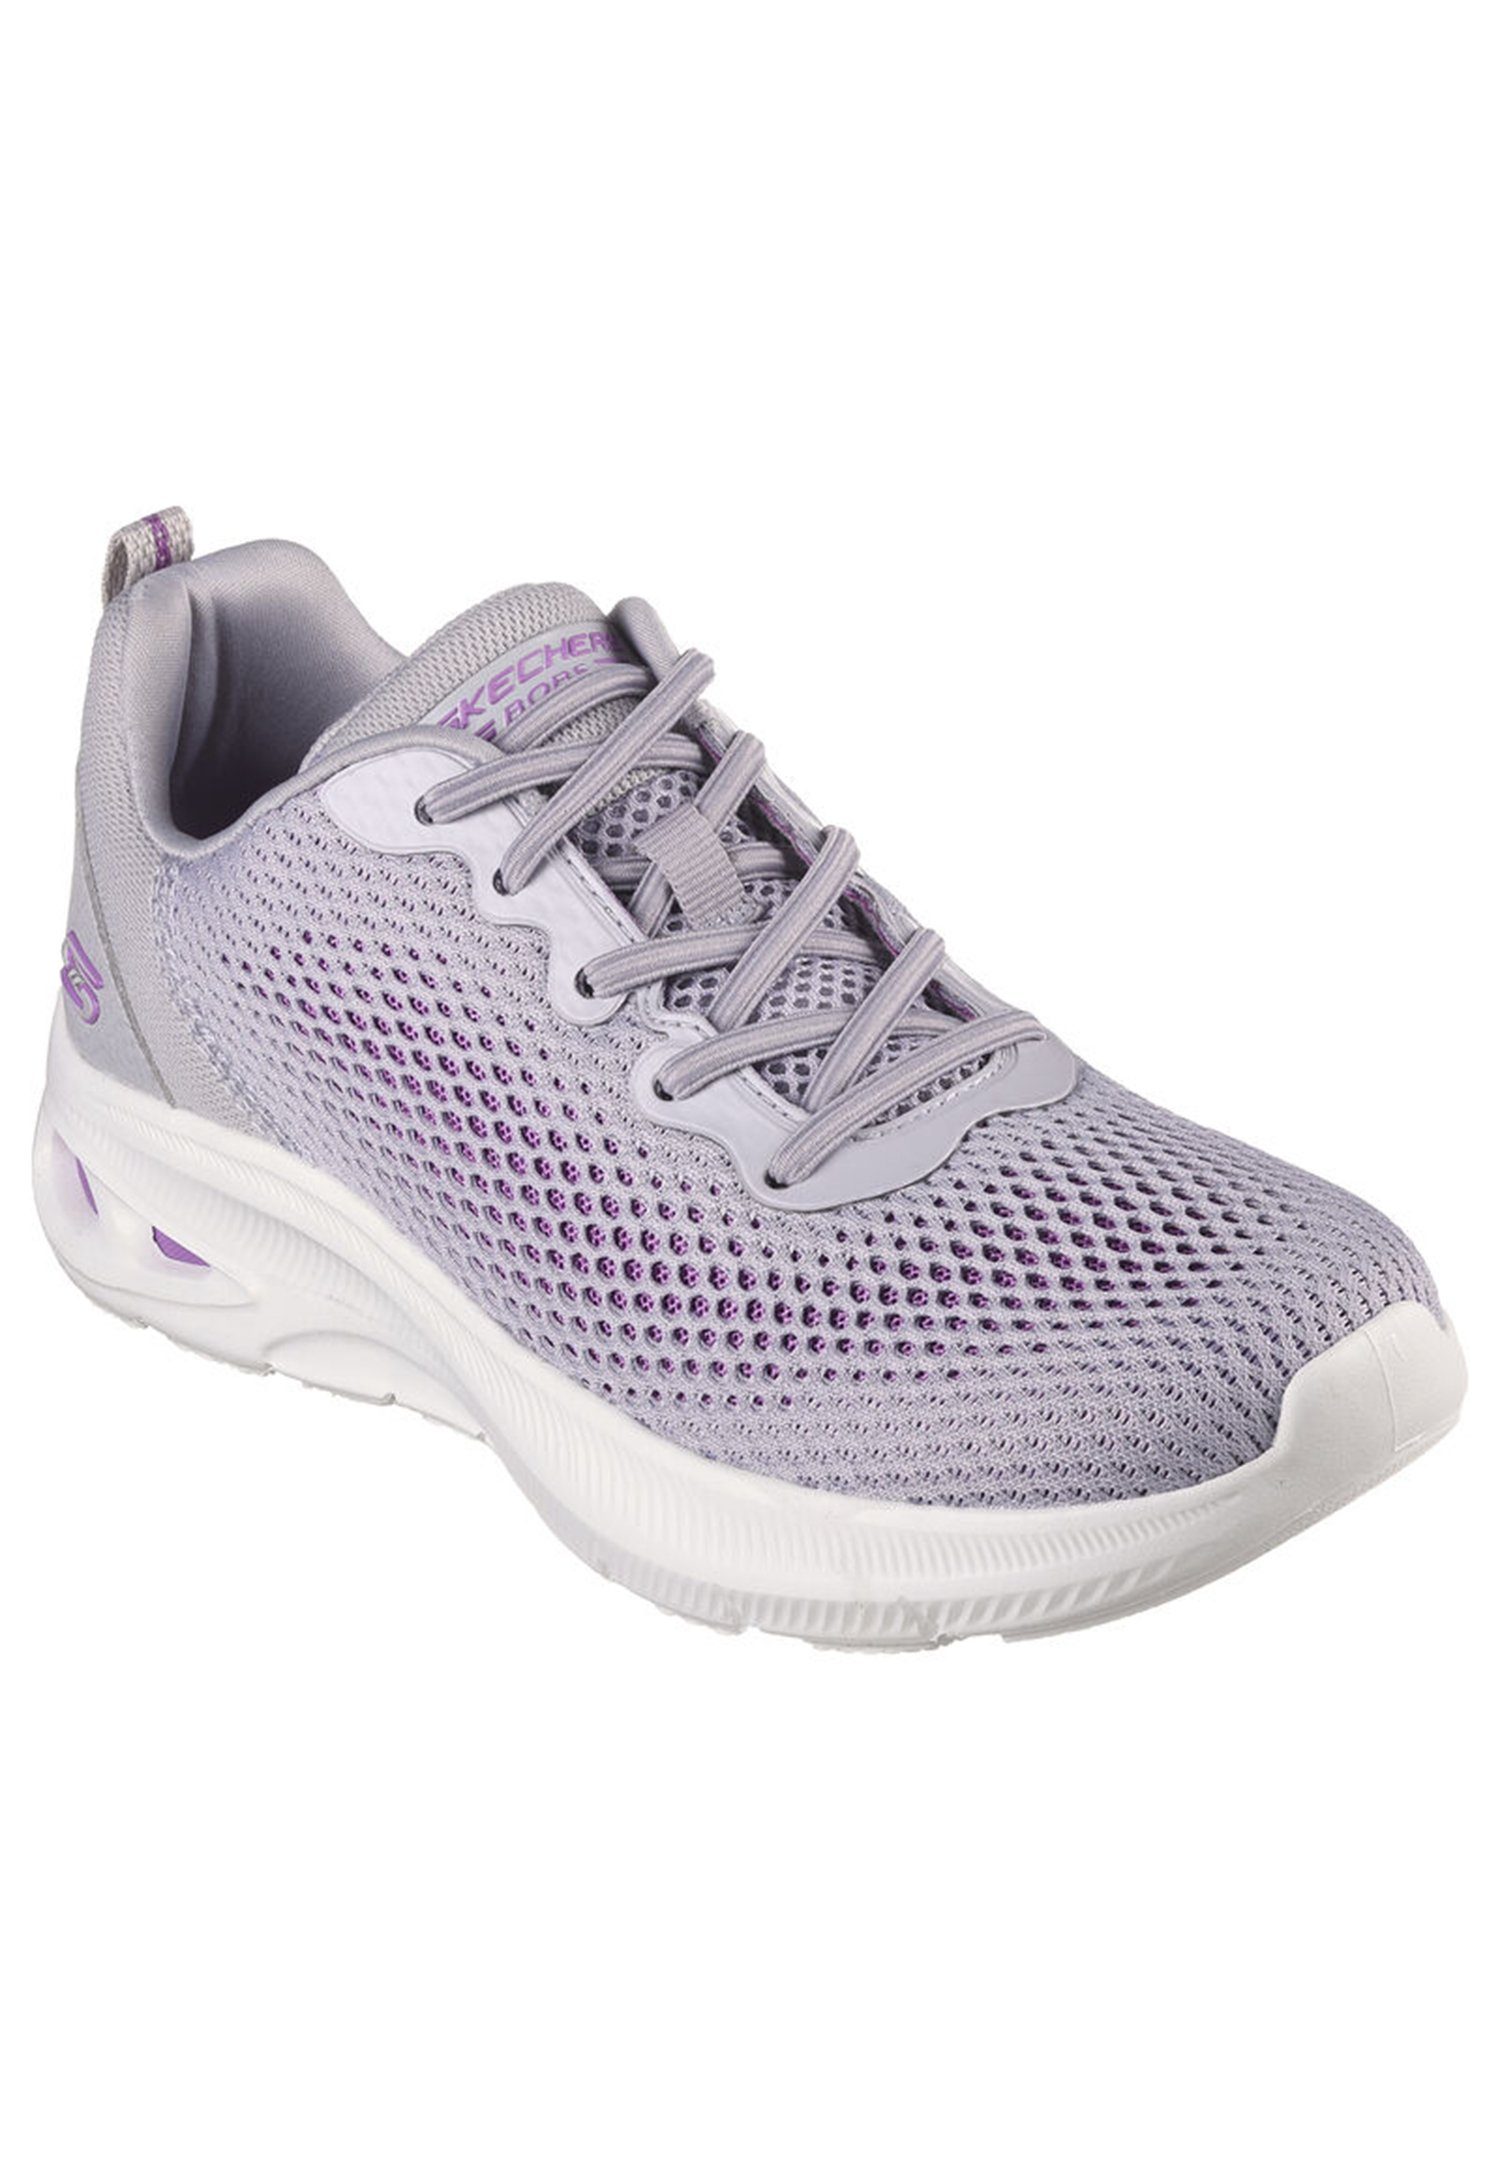 Skechers BOBS UNITY-HINT OF COLOR Sneaker